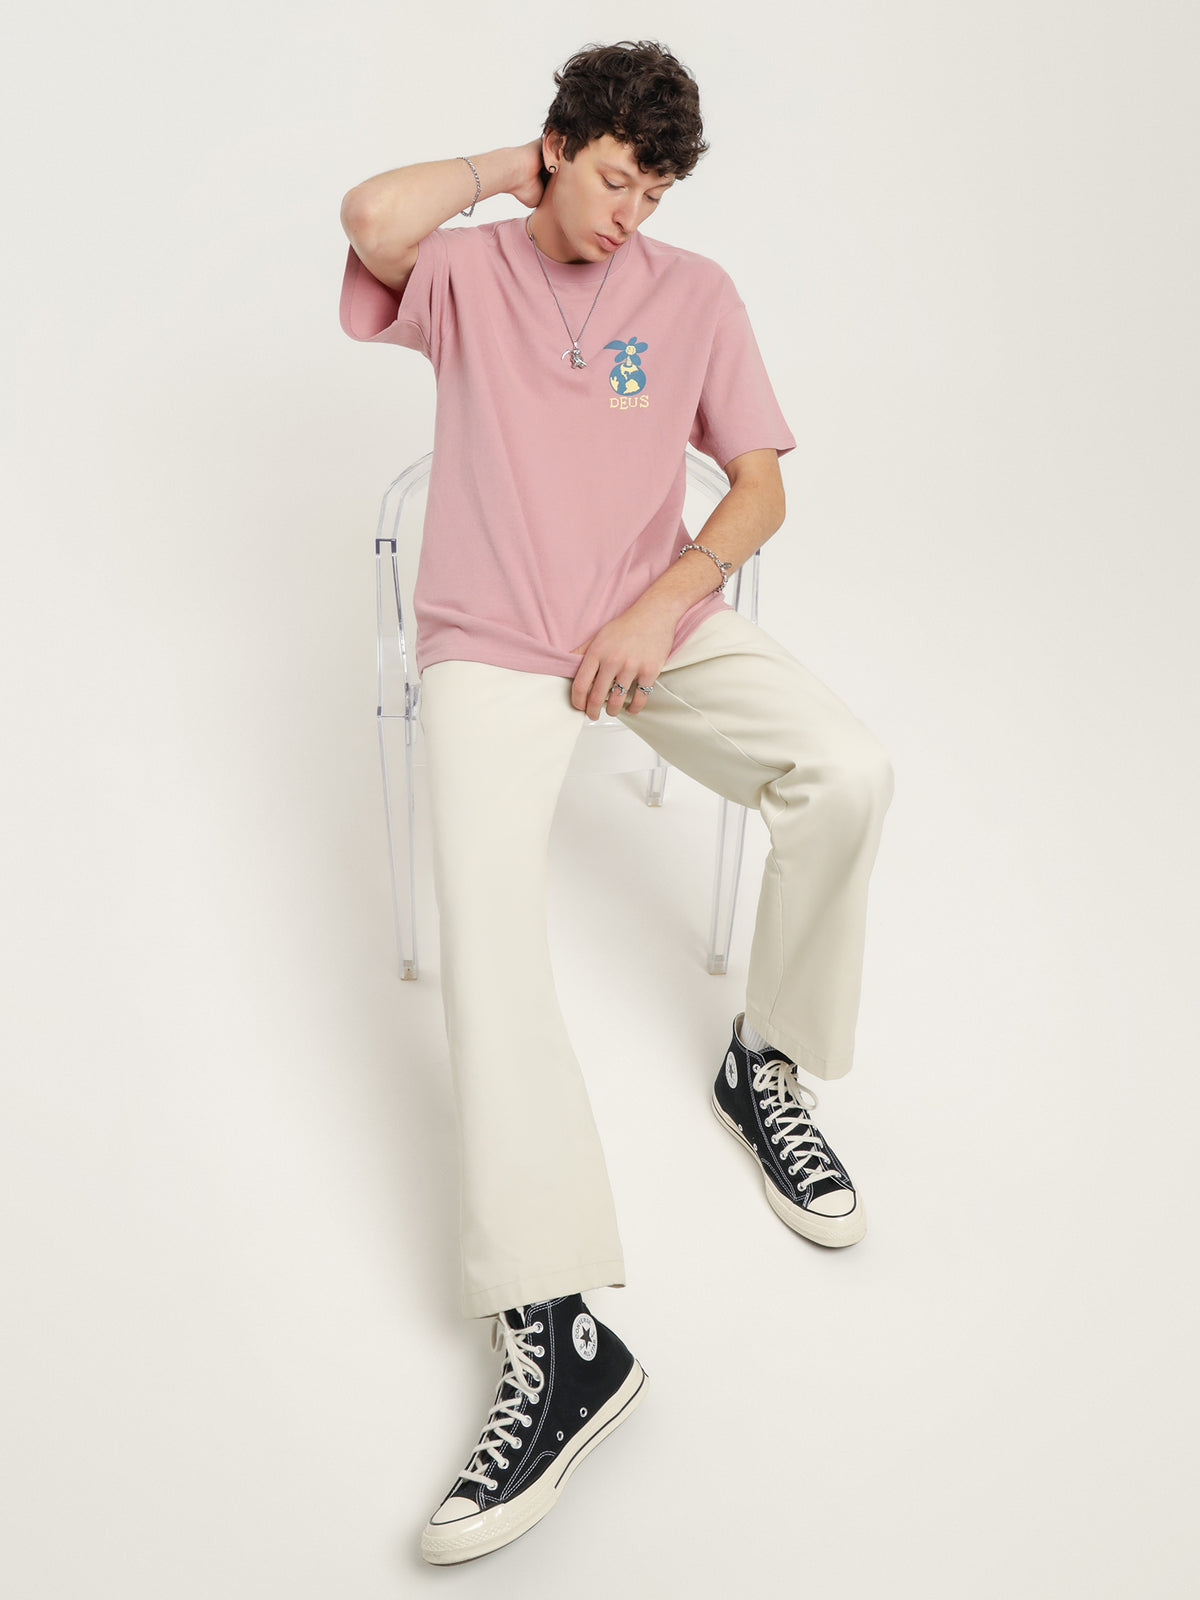 Thump T-Shirt in Zephyr Pink